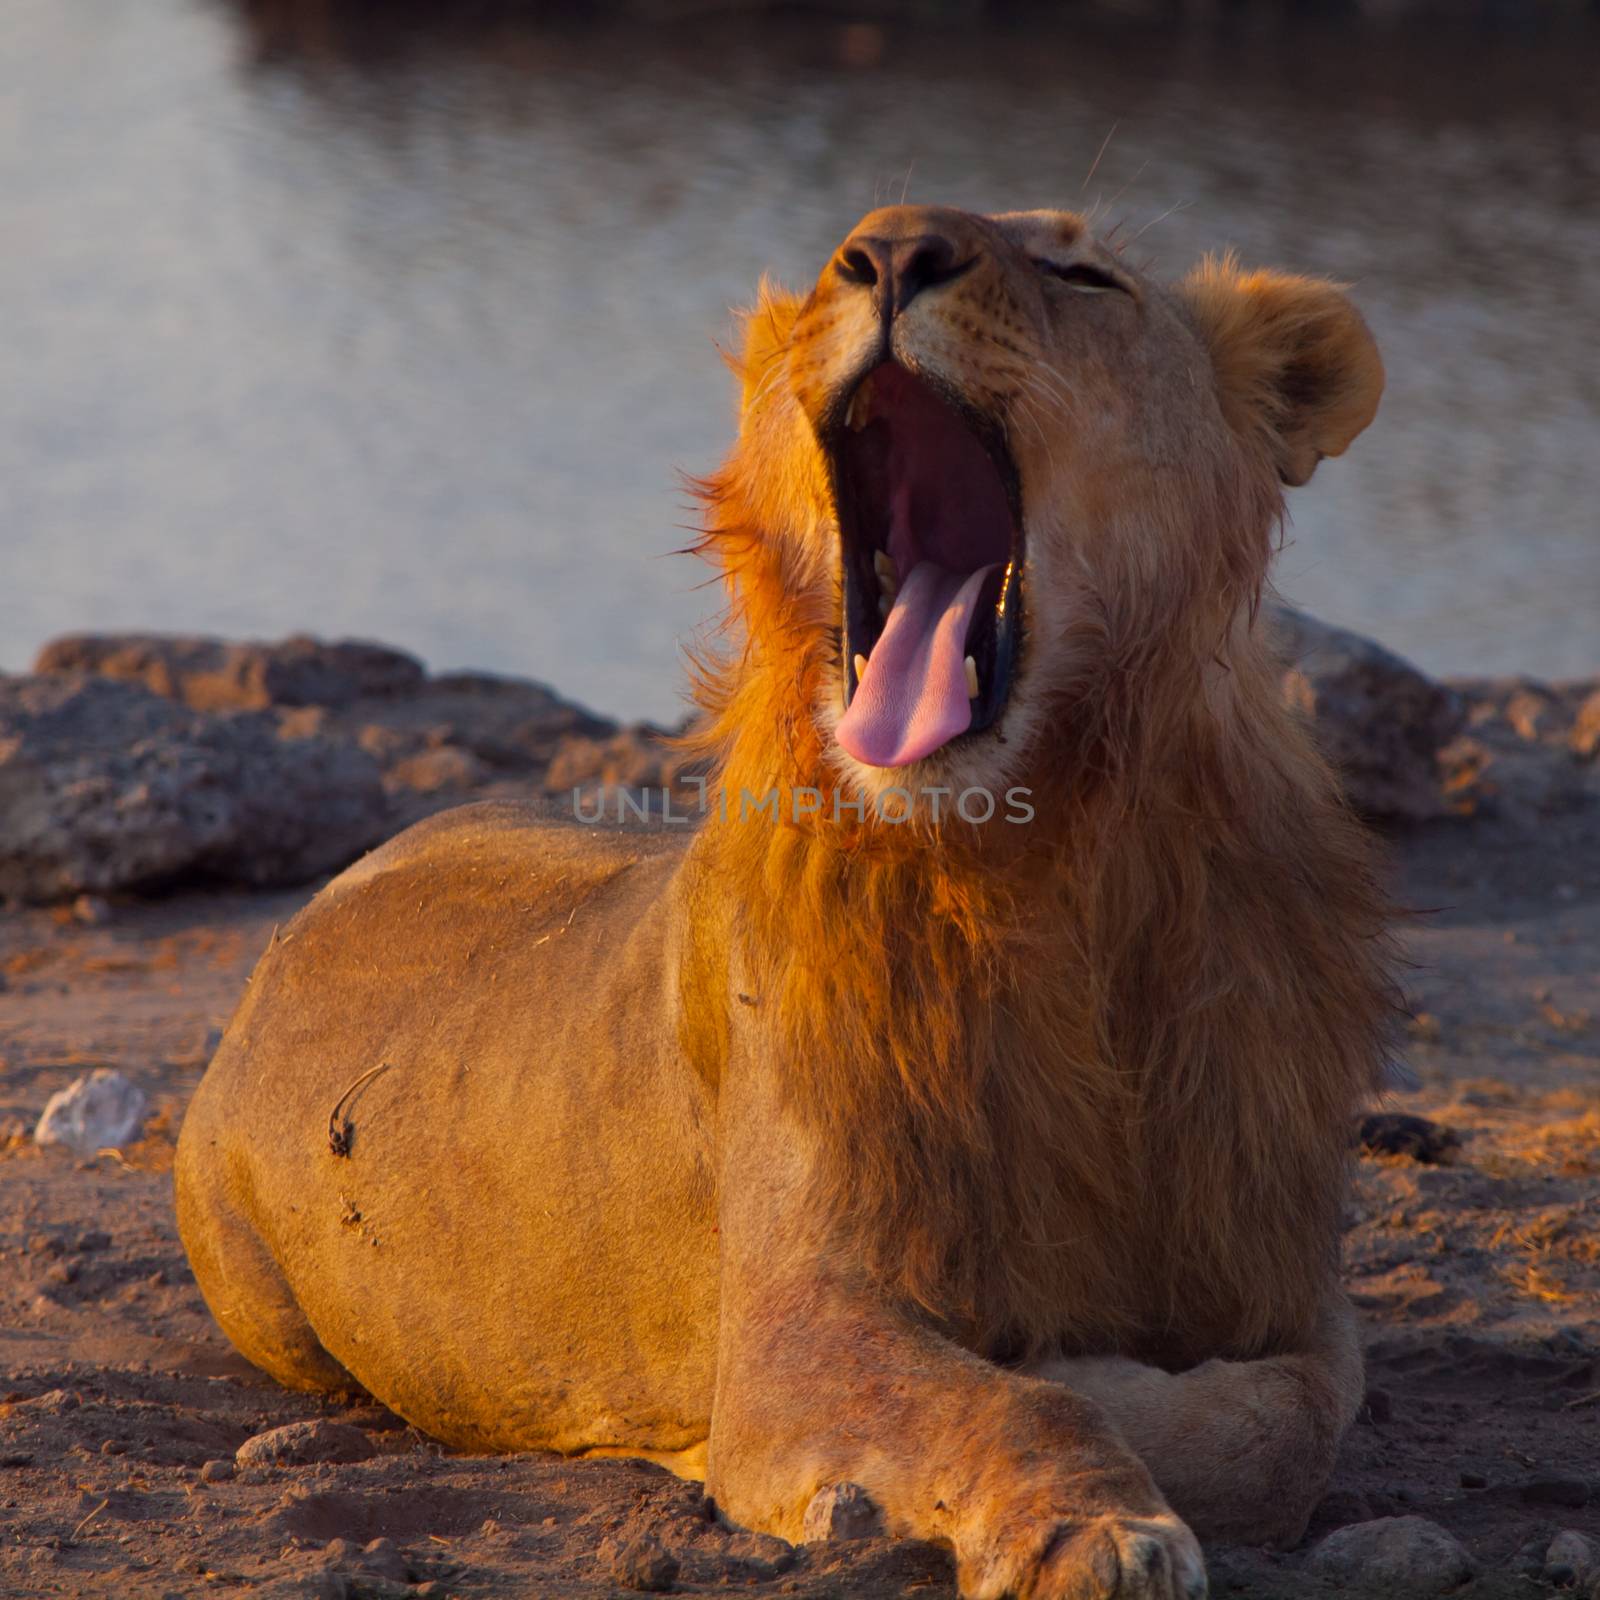 Yawning lion by pyty